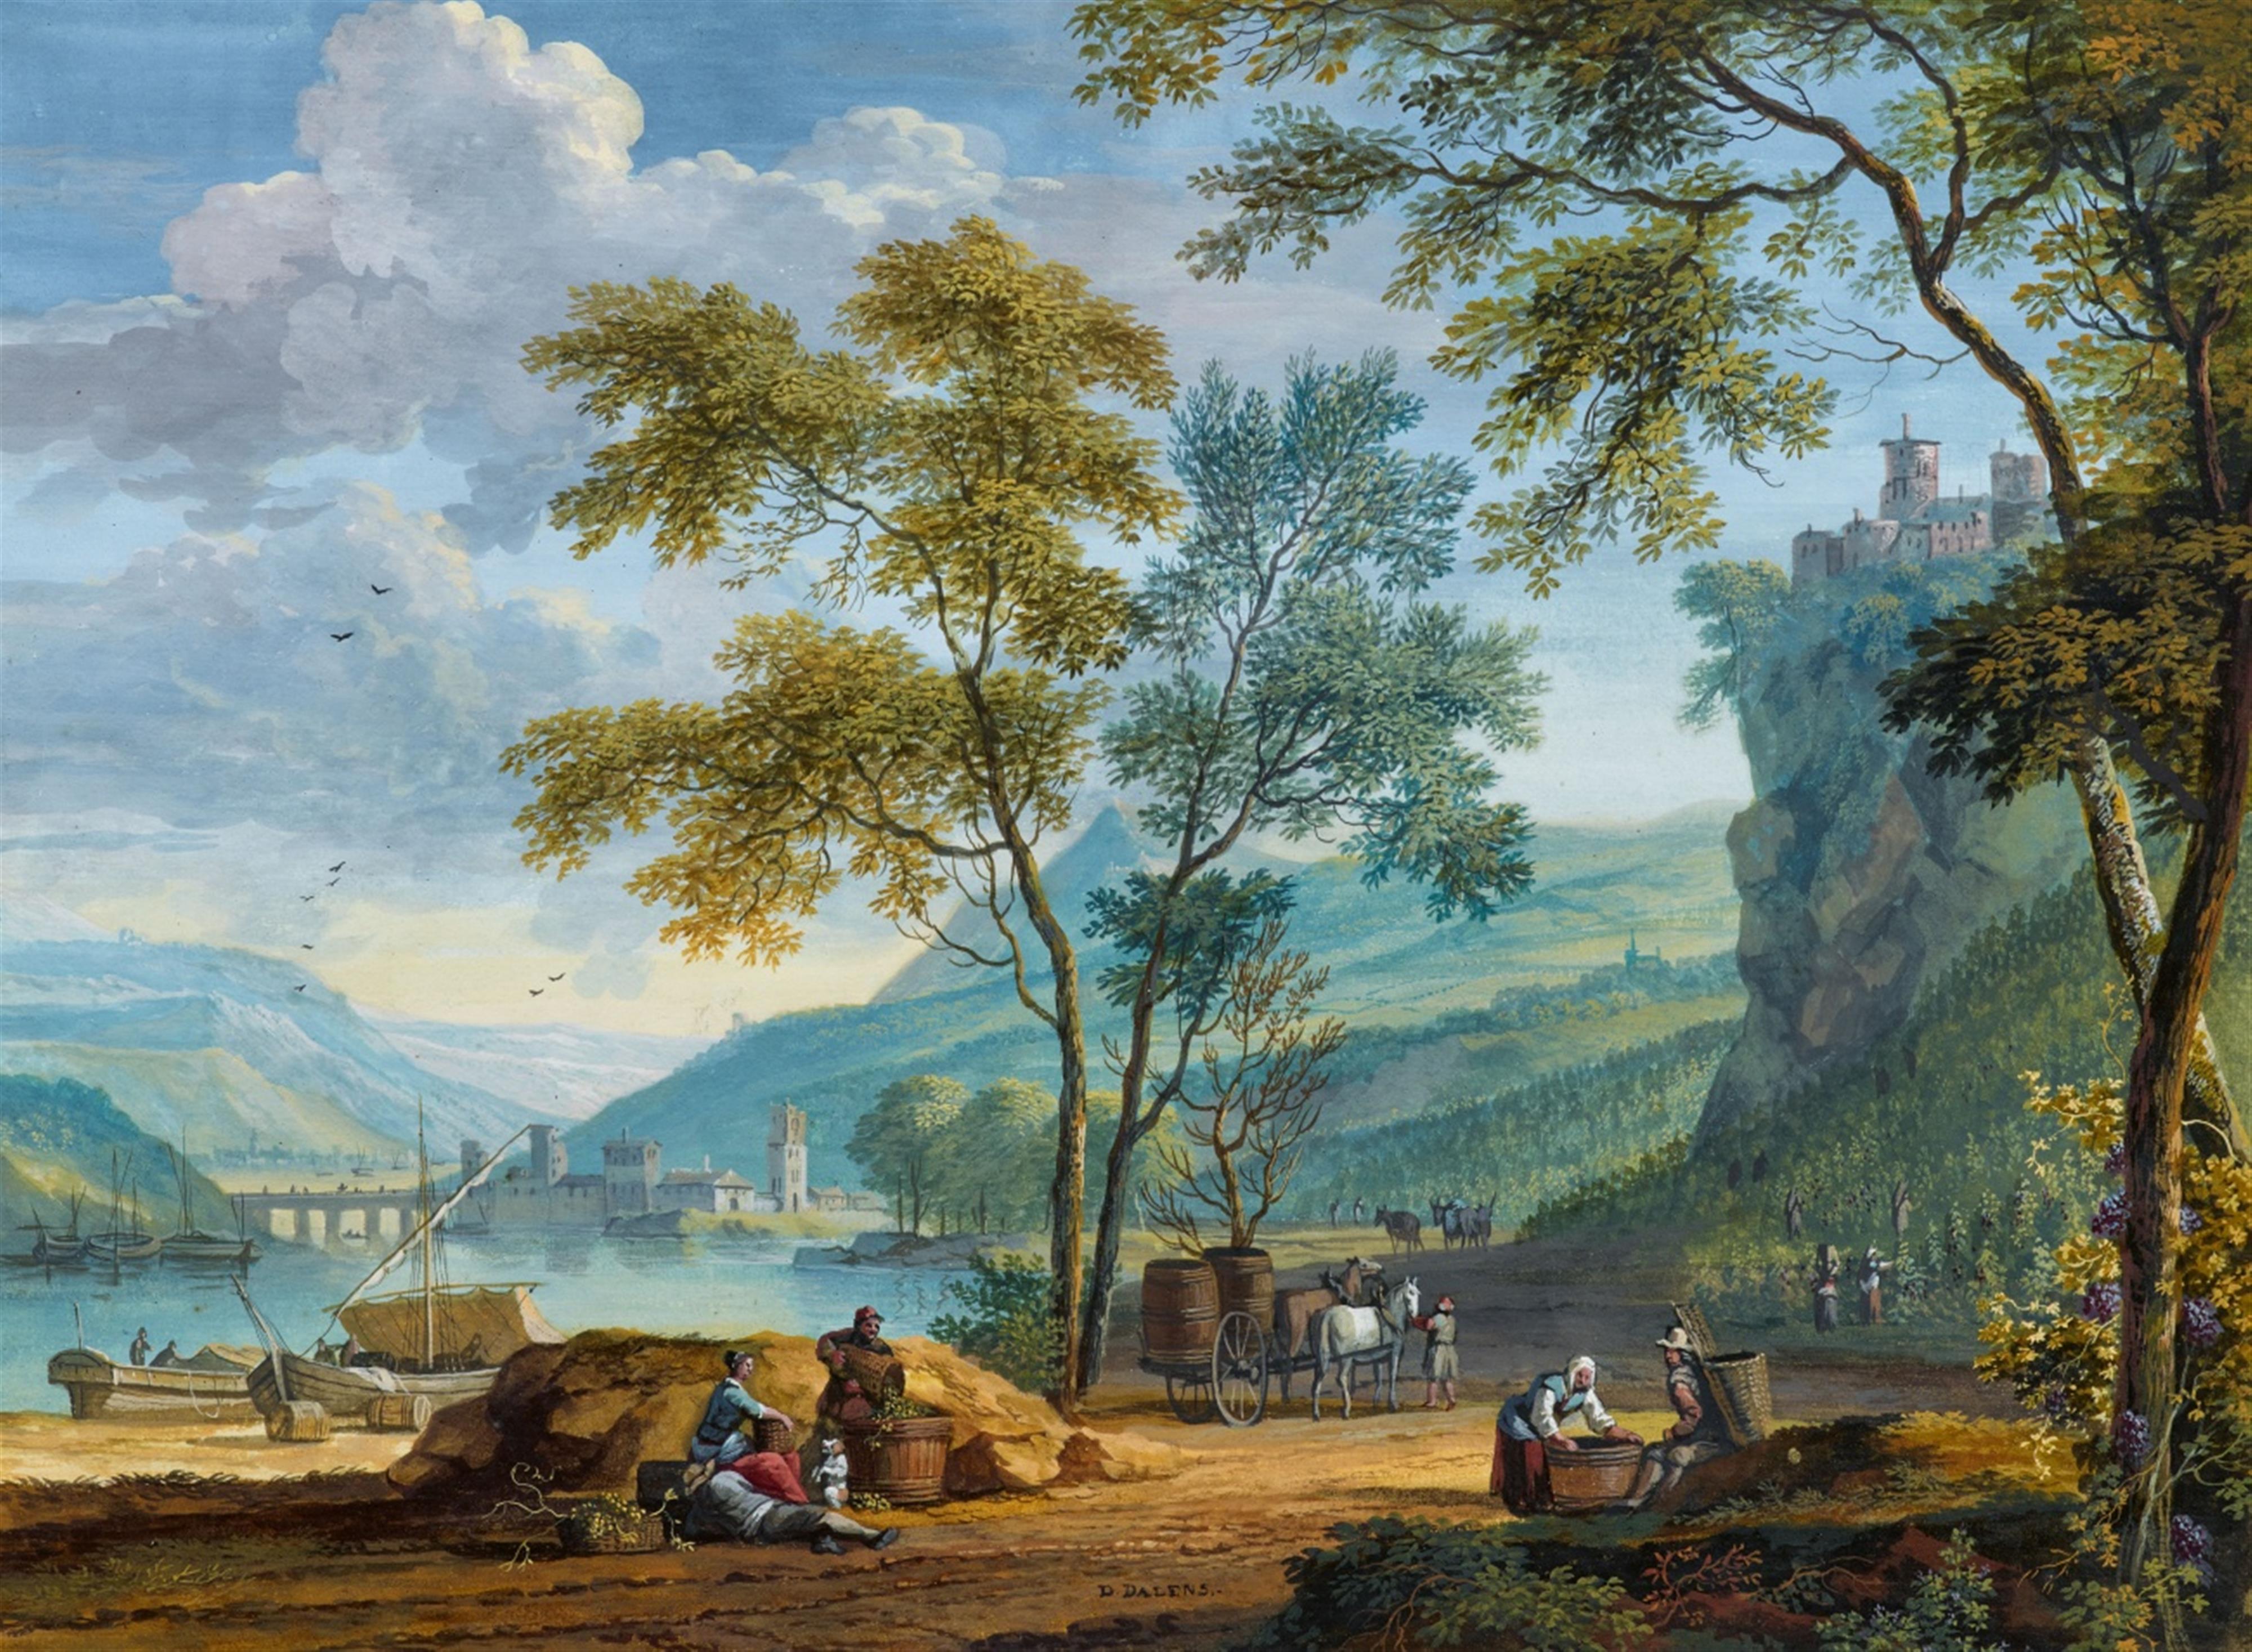 Dirck Dalens III - River Landscape in South Tirol or Northern Italy with Vineyards and Grape Pickers - image-1